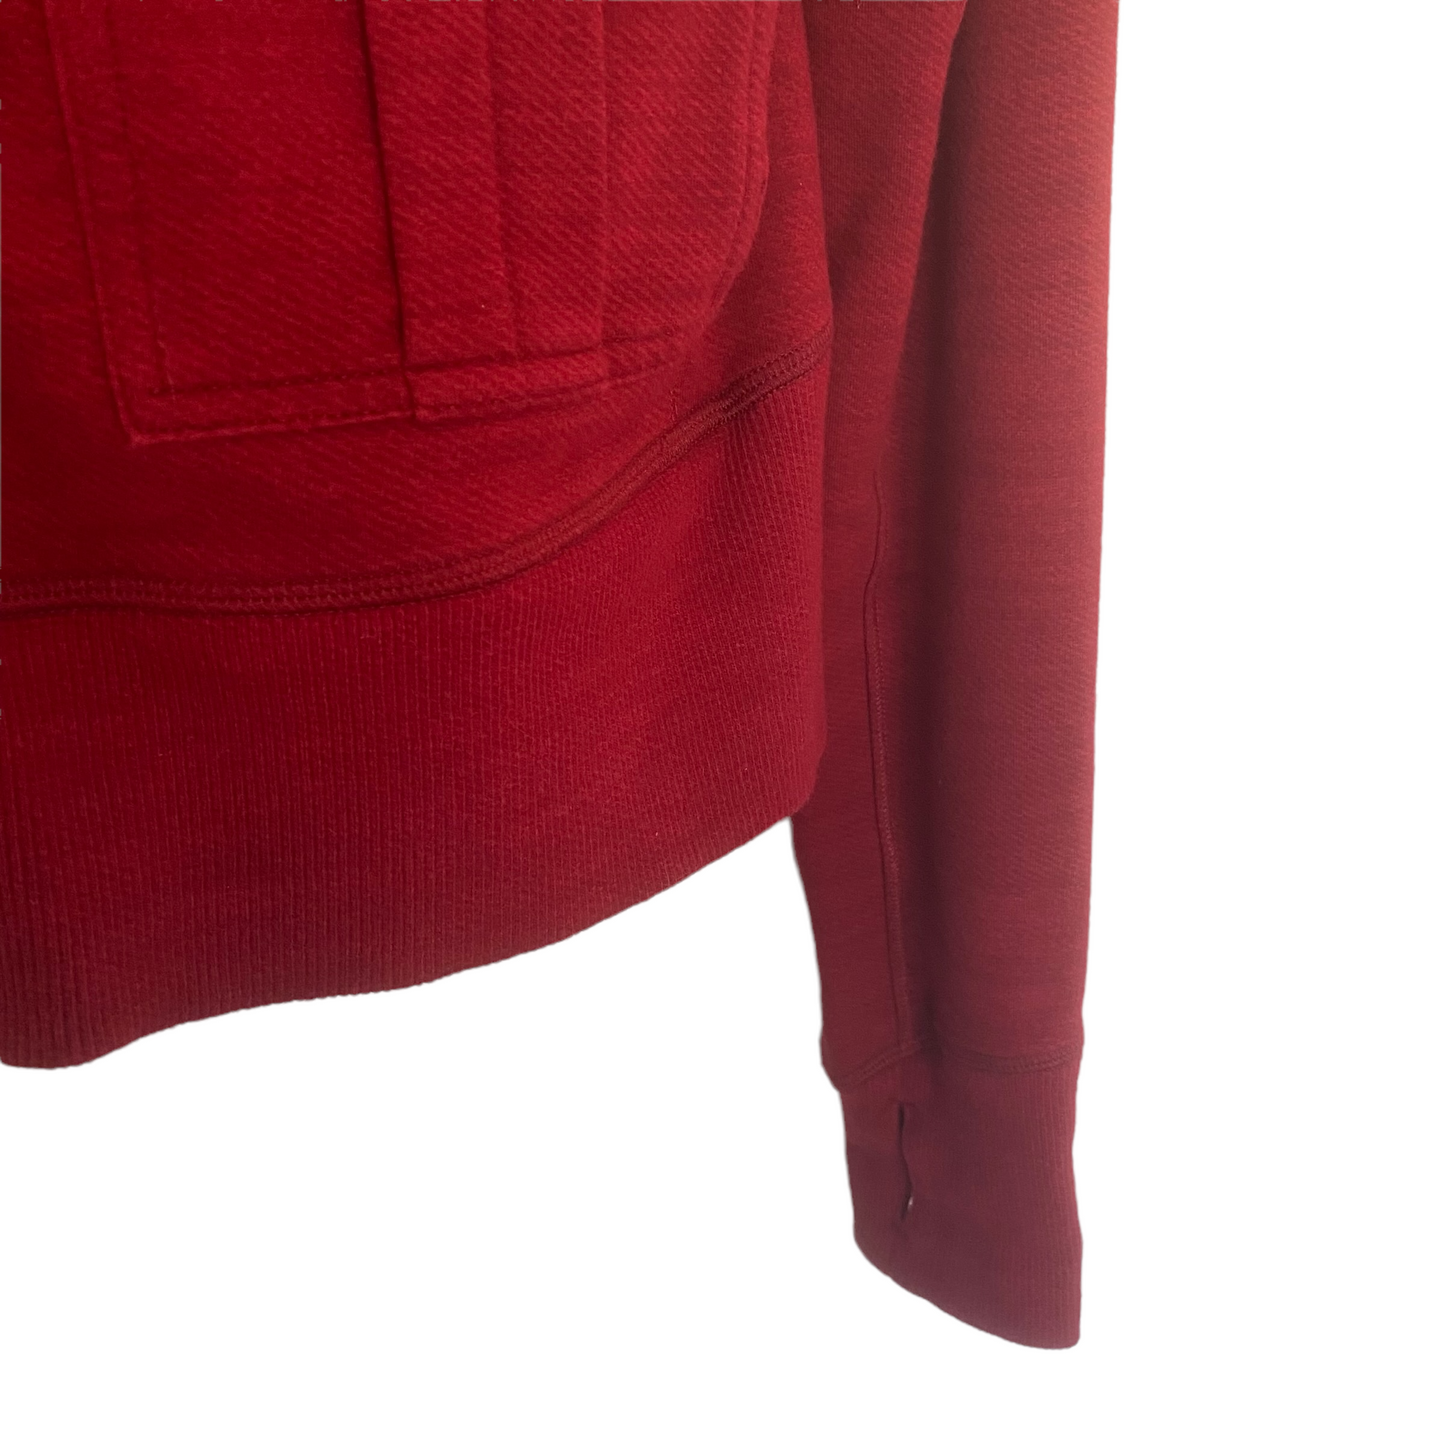 Lululemon Carry And Go Hoodie Jacket Red Size 12